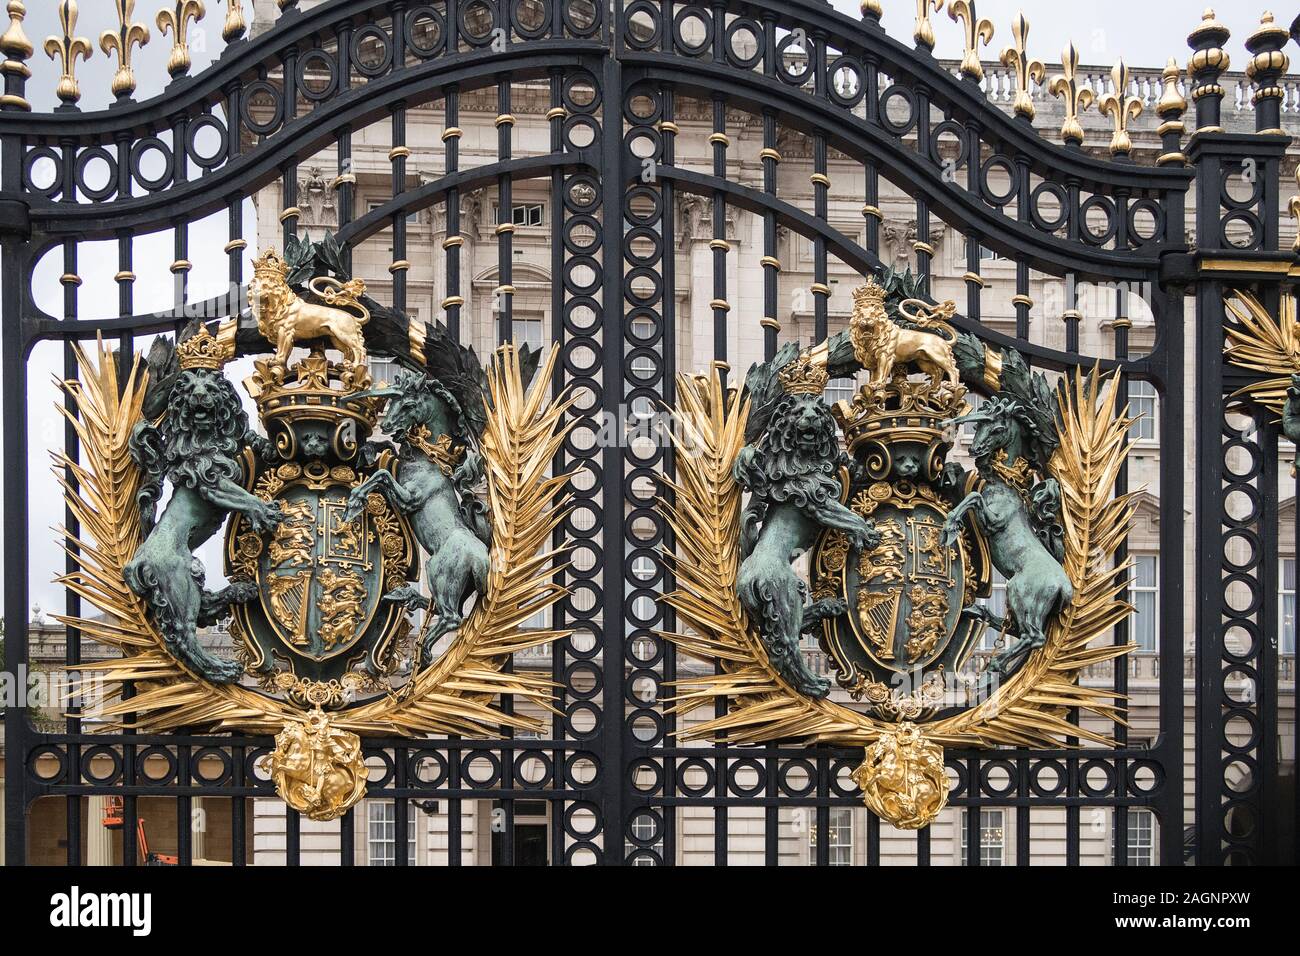 London, United Kingdom - October, 2018: Close up of the iron decorations on the Gates of Buckingham Palace, the residence of British royal family in t Stock Photo